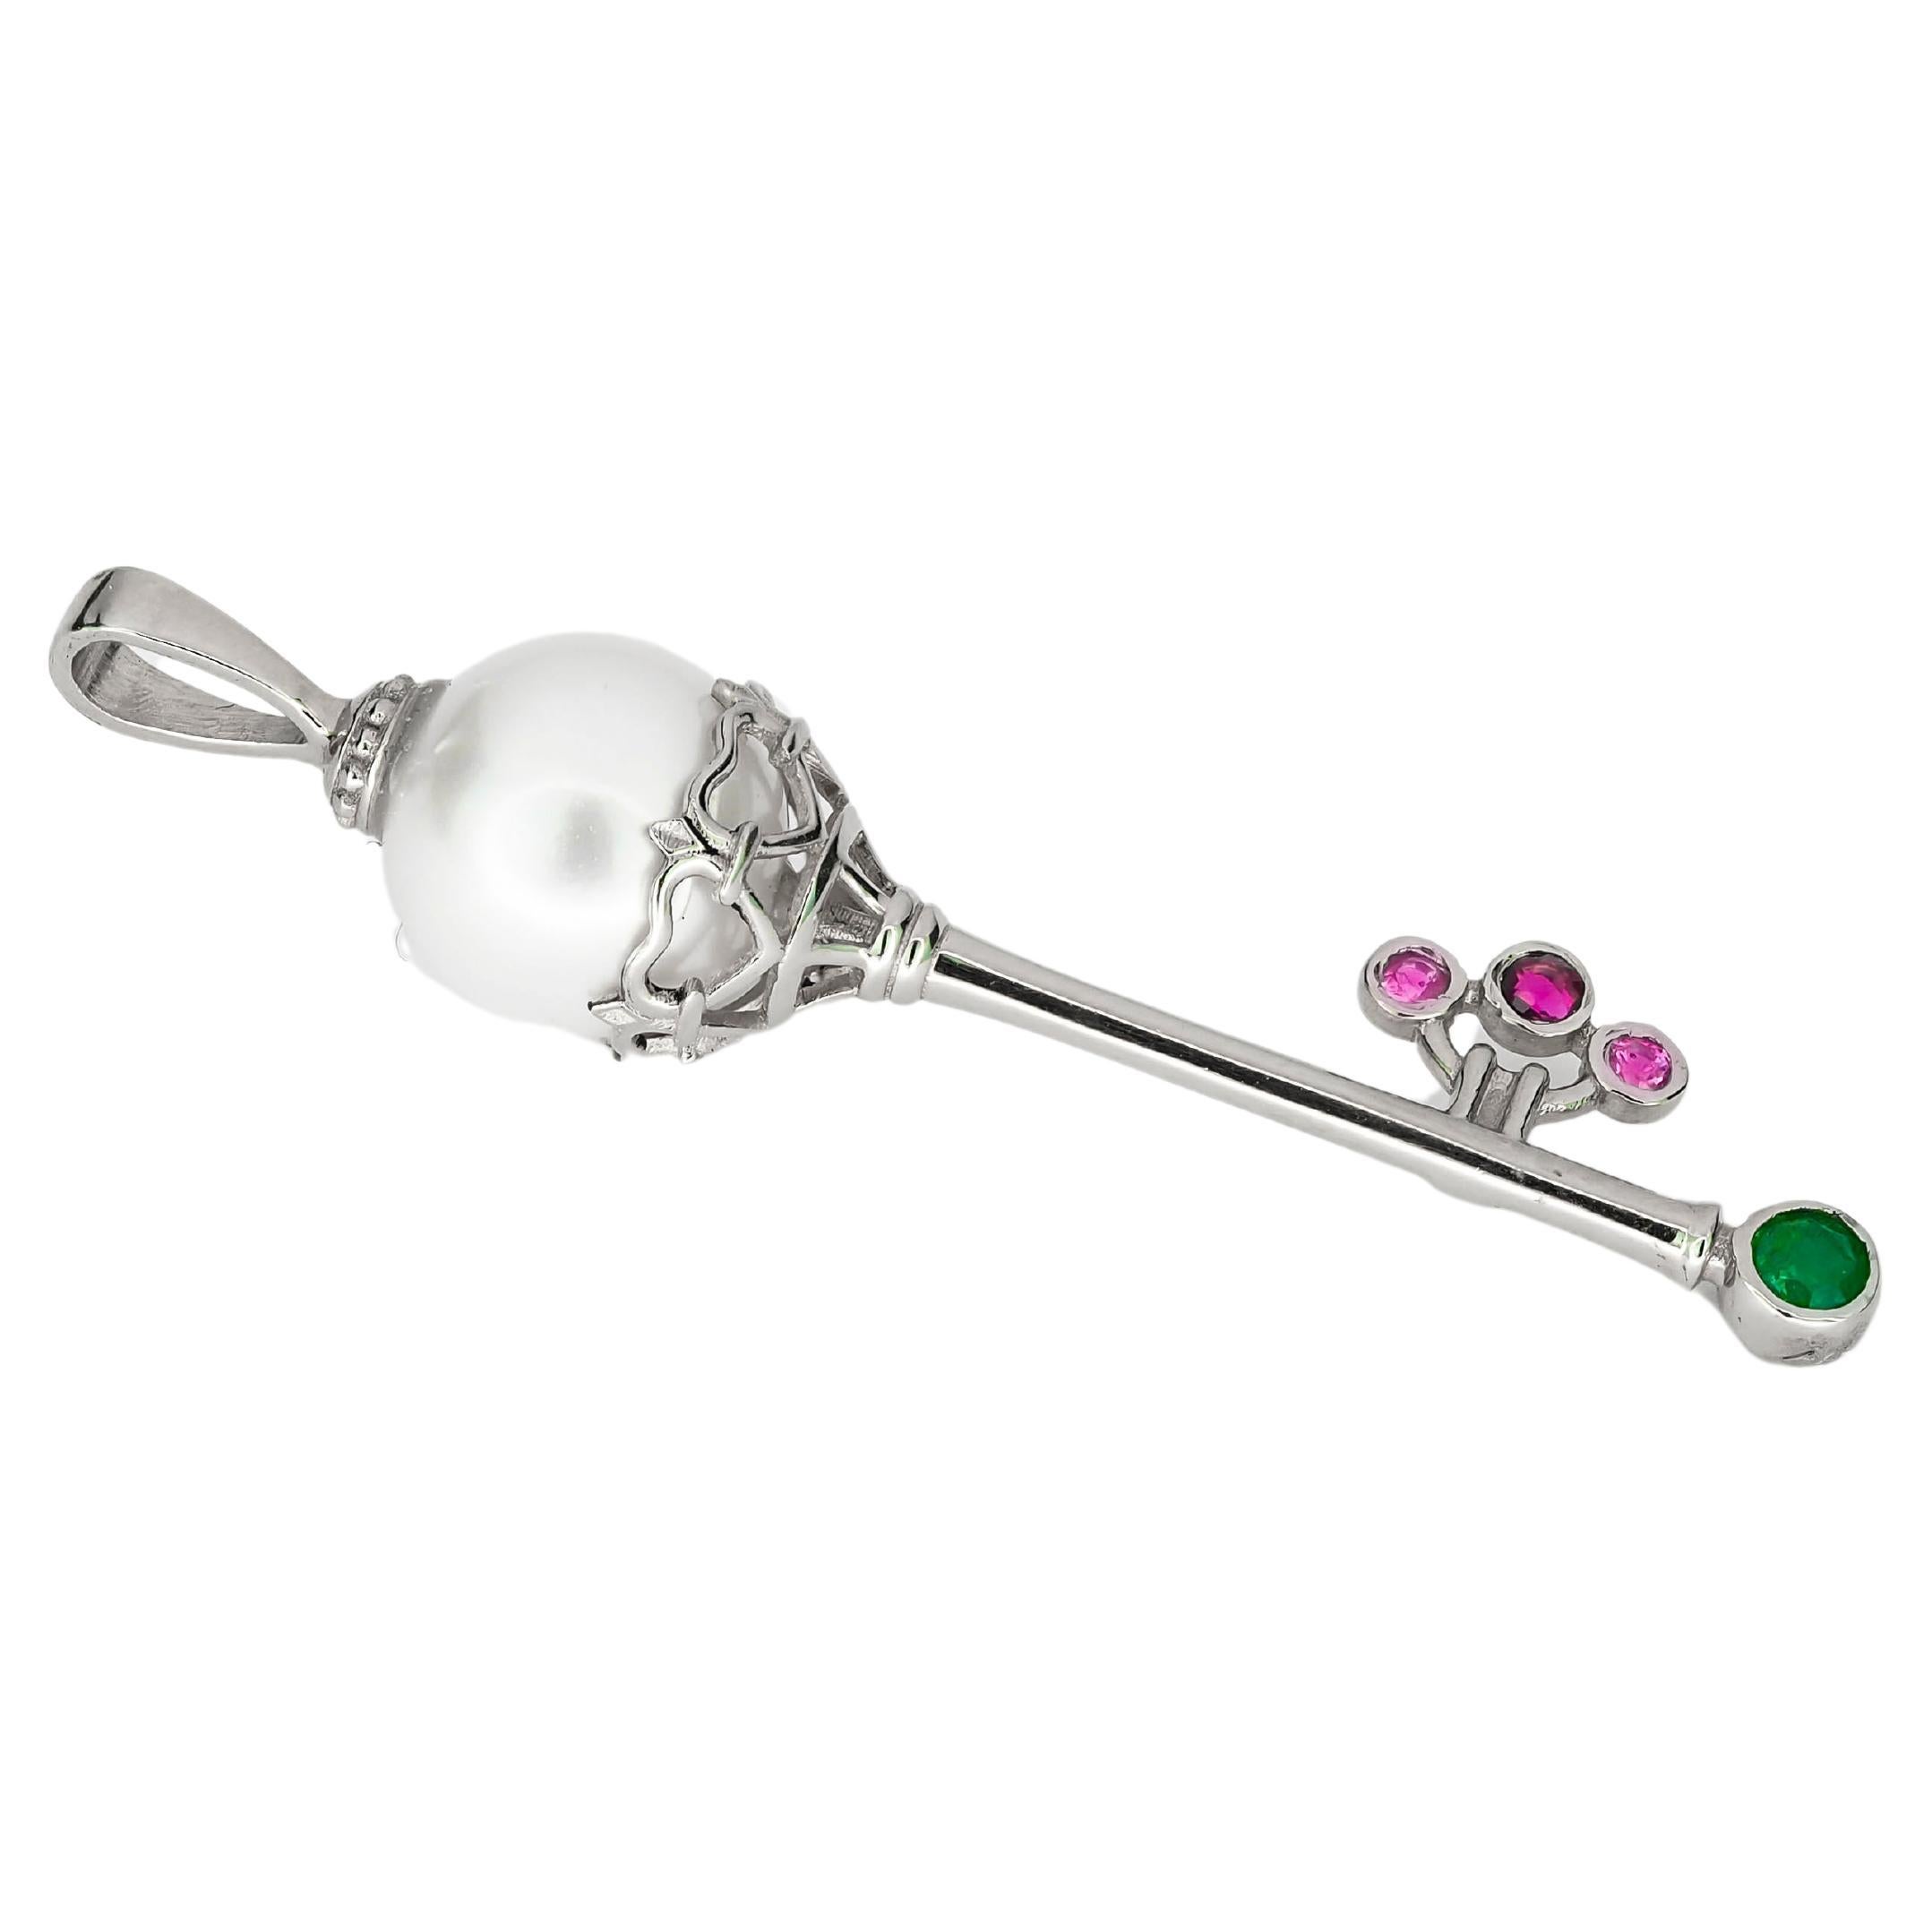 Key pendant with pearl, emerald and sapphires. 